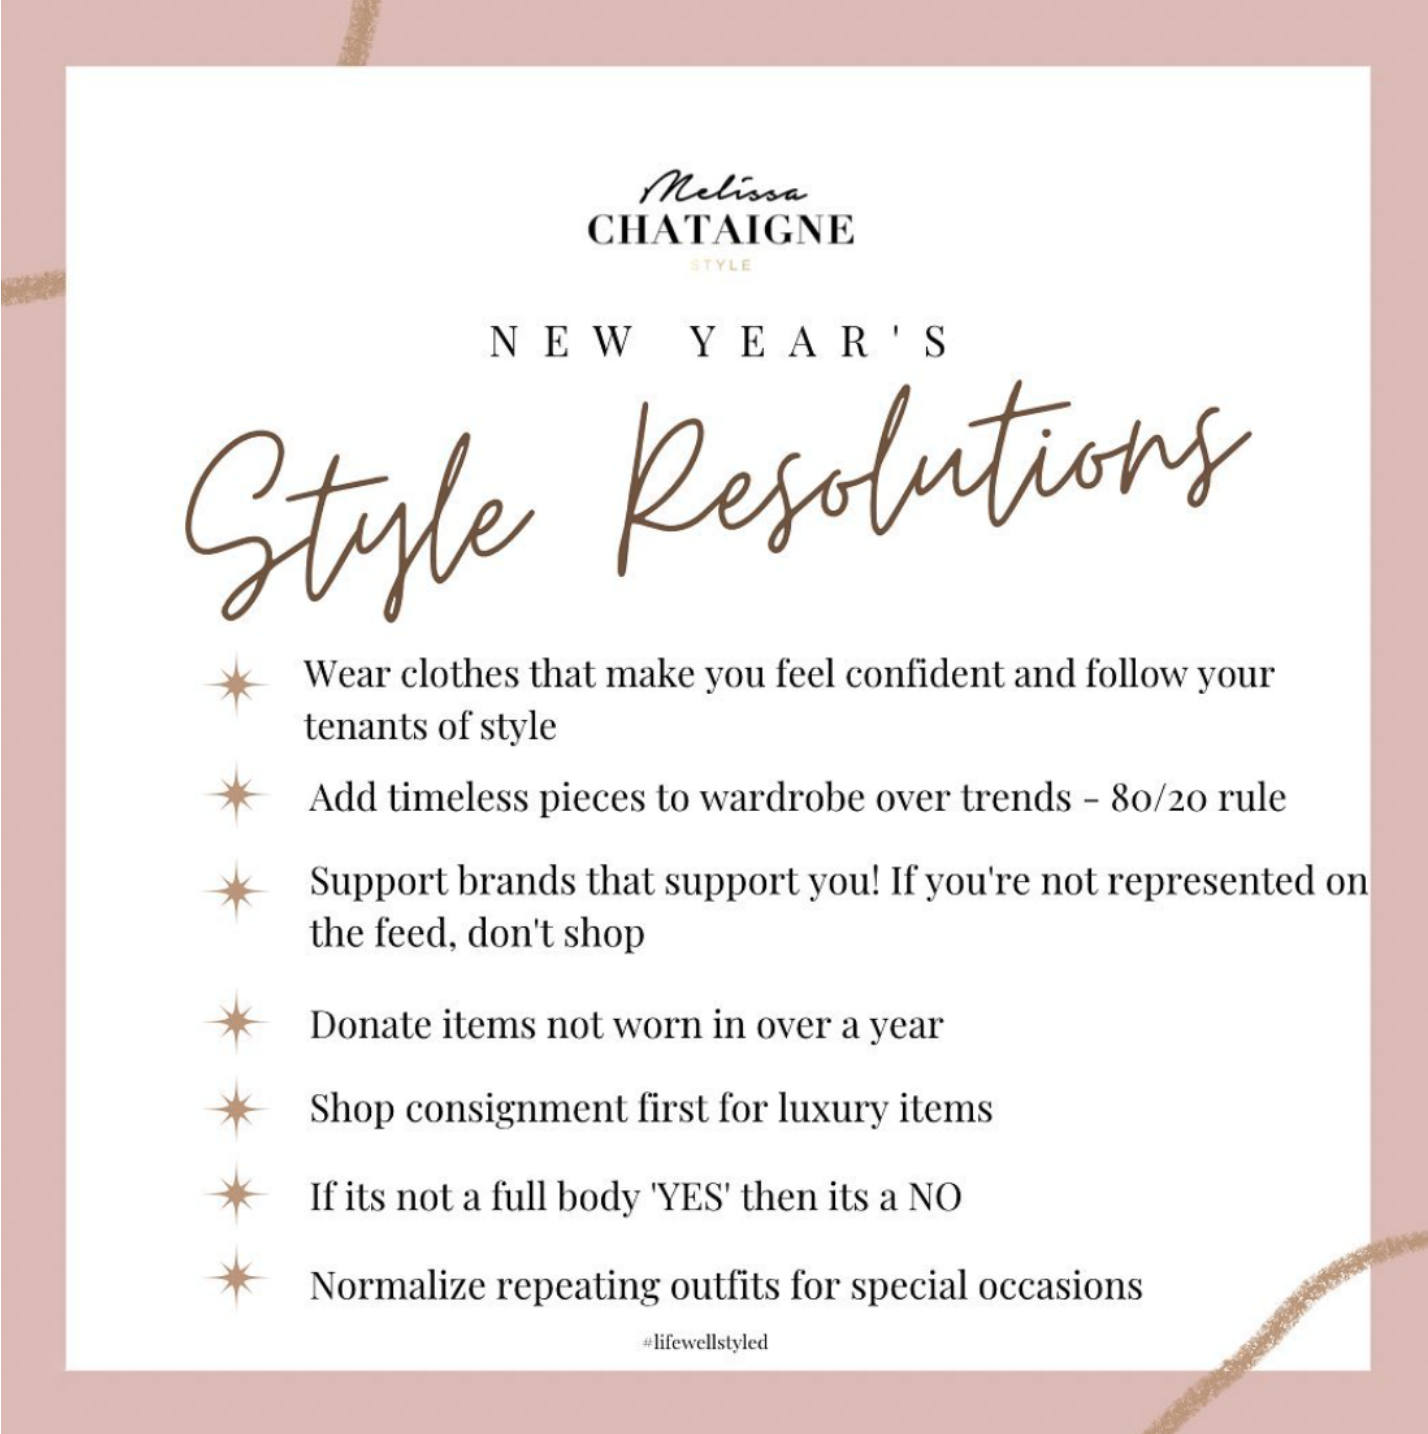 Melissa Chataigne Style resolutions